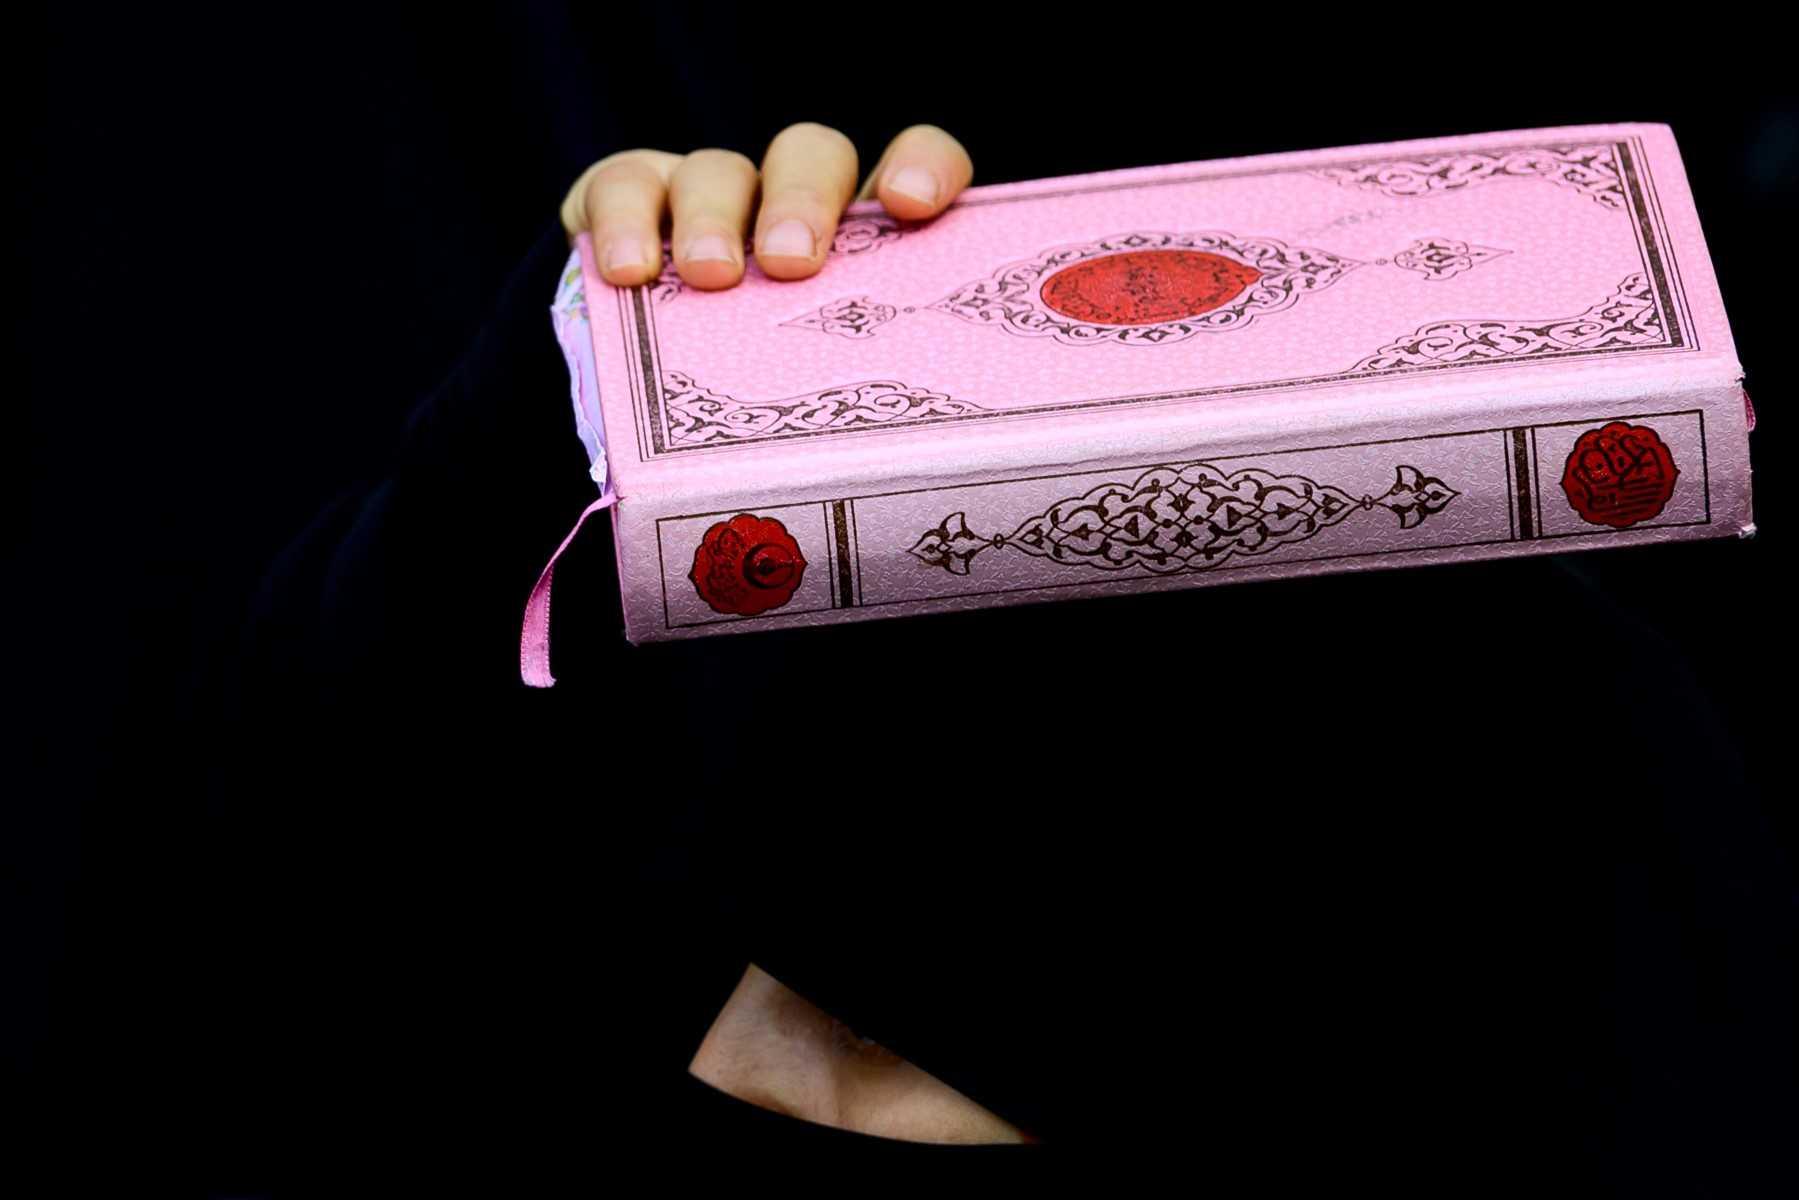 A protester holds a copy of the Quran in front of the consulate-general of Sweden in Istanbul on Jan 22, after Rasmus Paludan, leader of Danish far-right political party Hard Line burned a copy of the Quran near the Turkish embassy in Stockholm. Photo: AFP